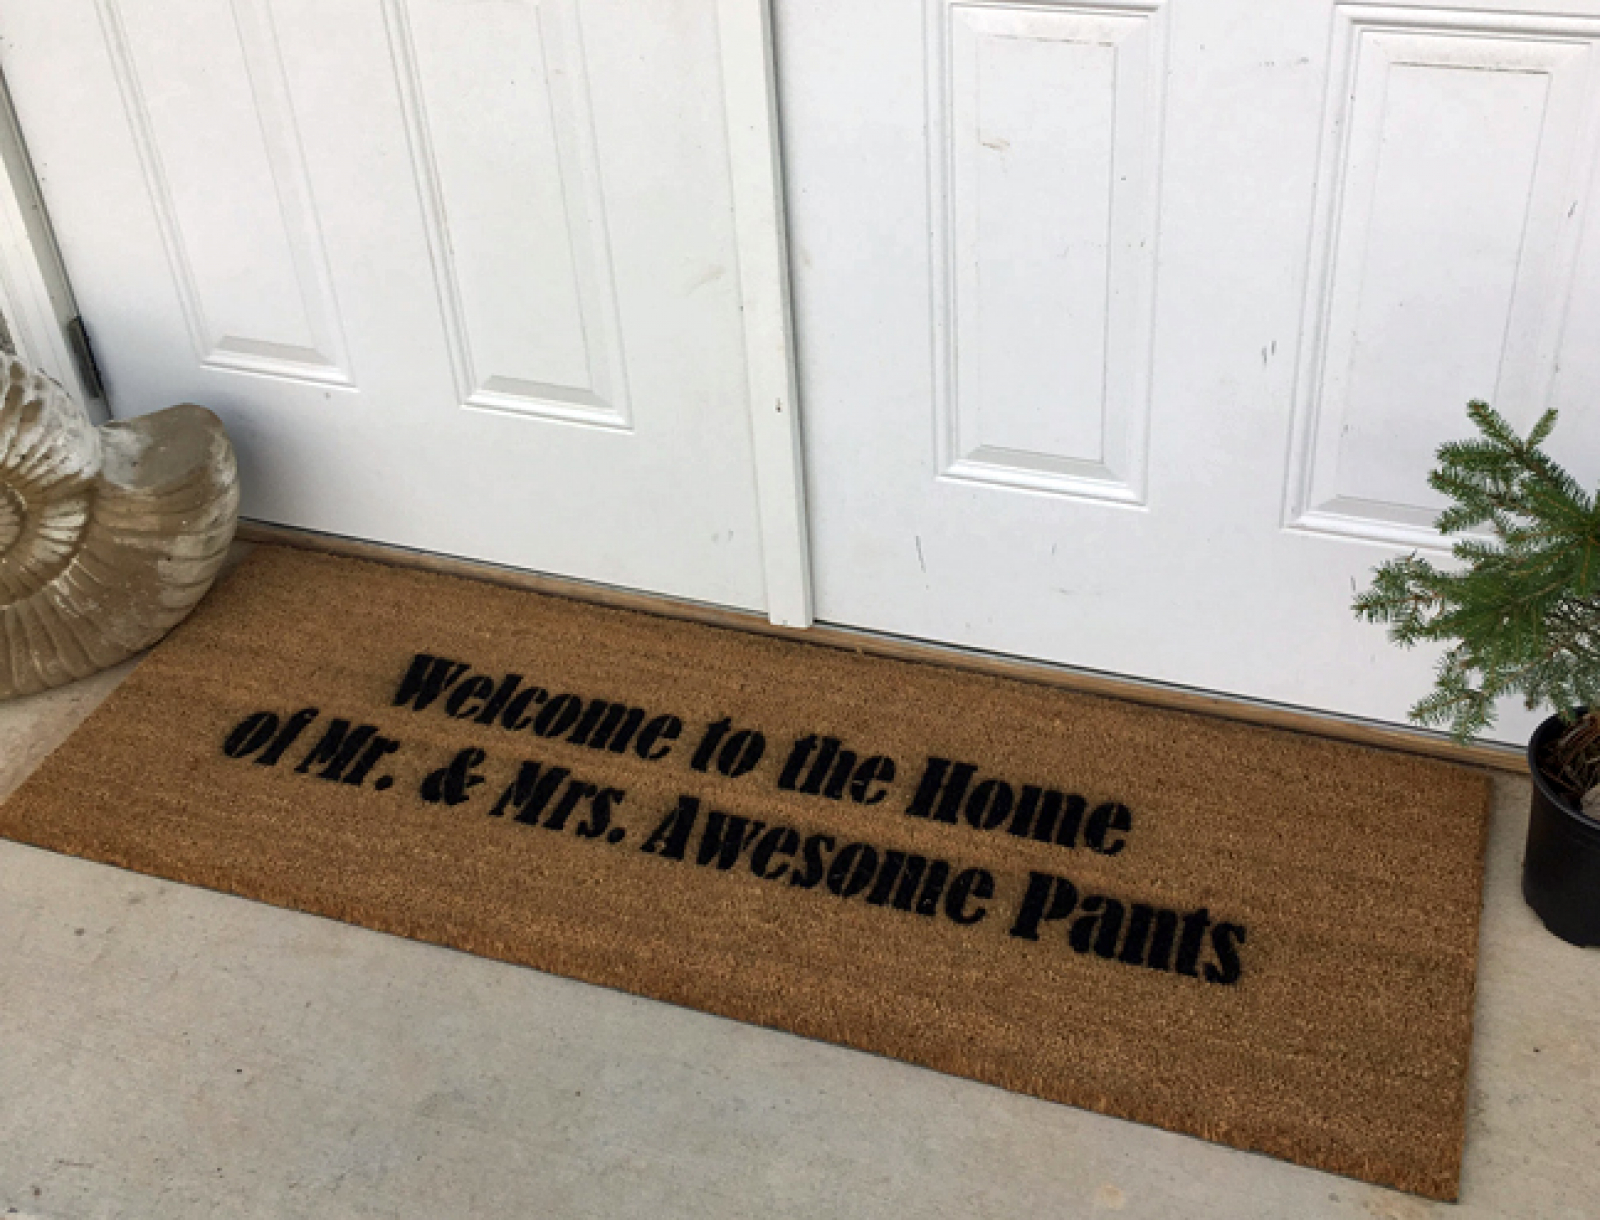 Double wide Welcome to the home of Mr. & Mrs. Awesome Pants™ doormat